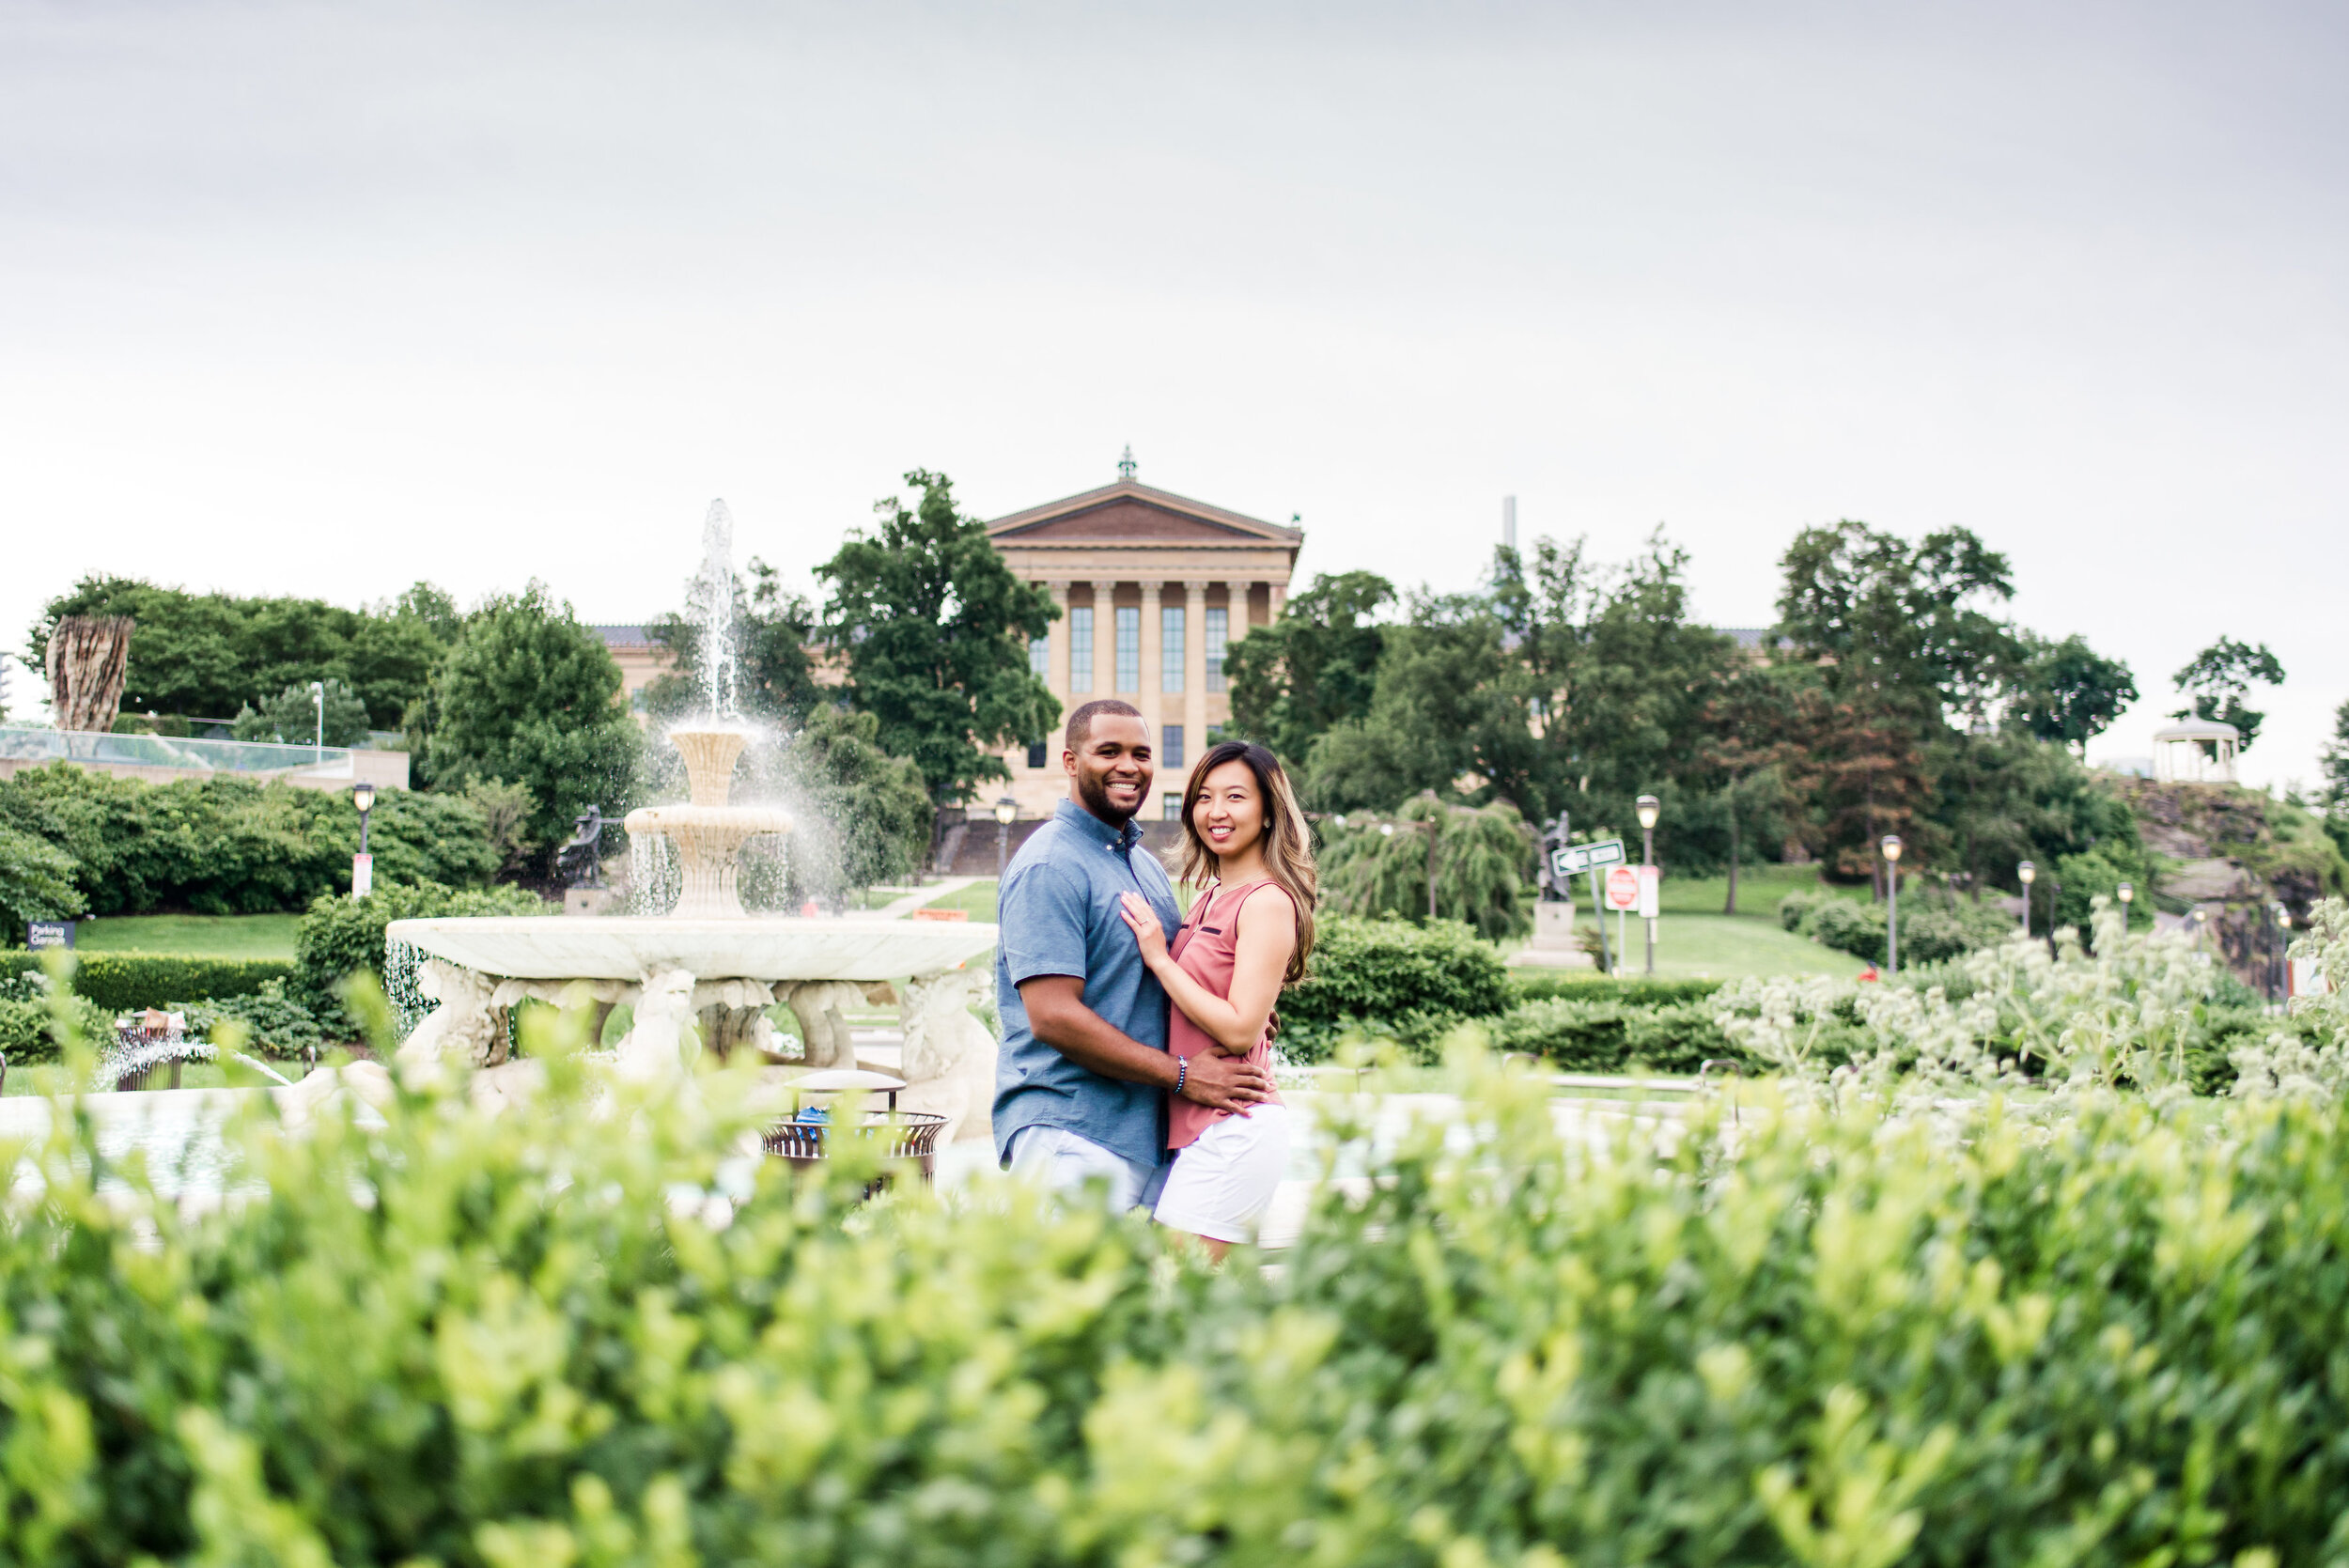 Amber and Colin’s engagement session includes some of the best spots in Philadelphia including Race Street Pier Park, Merchants Exchange Building and Fairmount Park! Plus three outfit changes and all the inspo you need for your Philadelphia engageme…